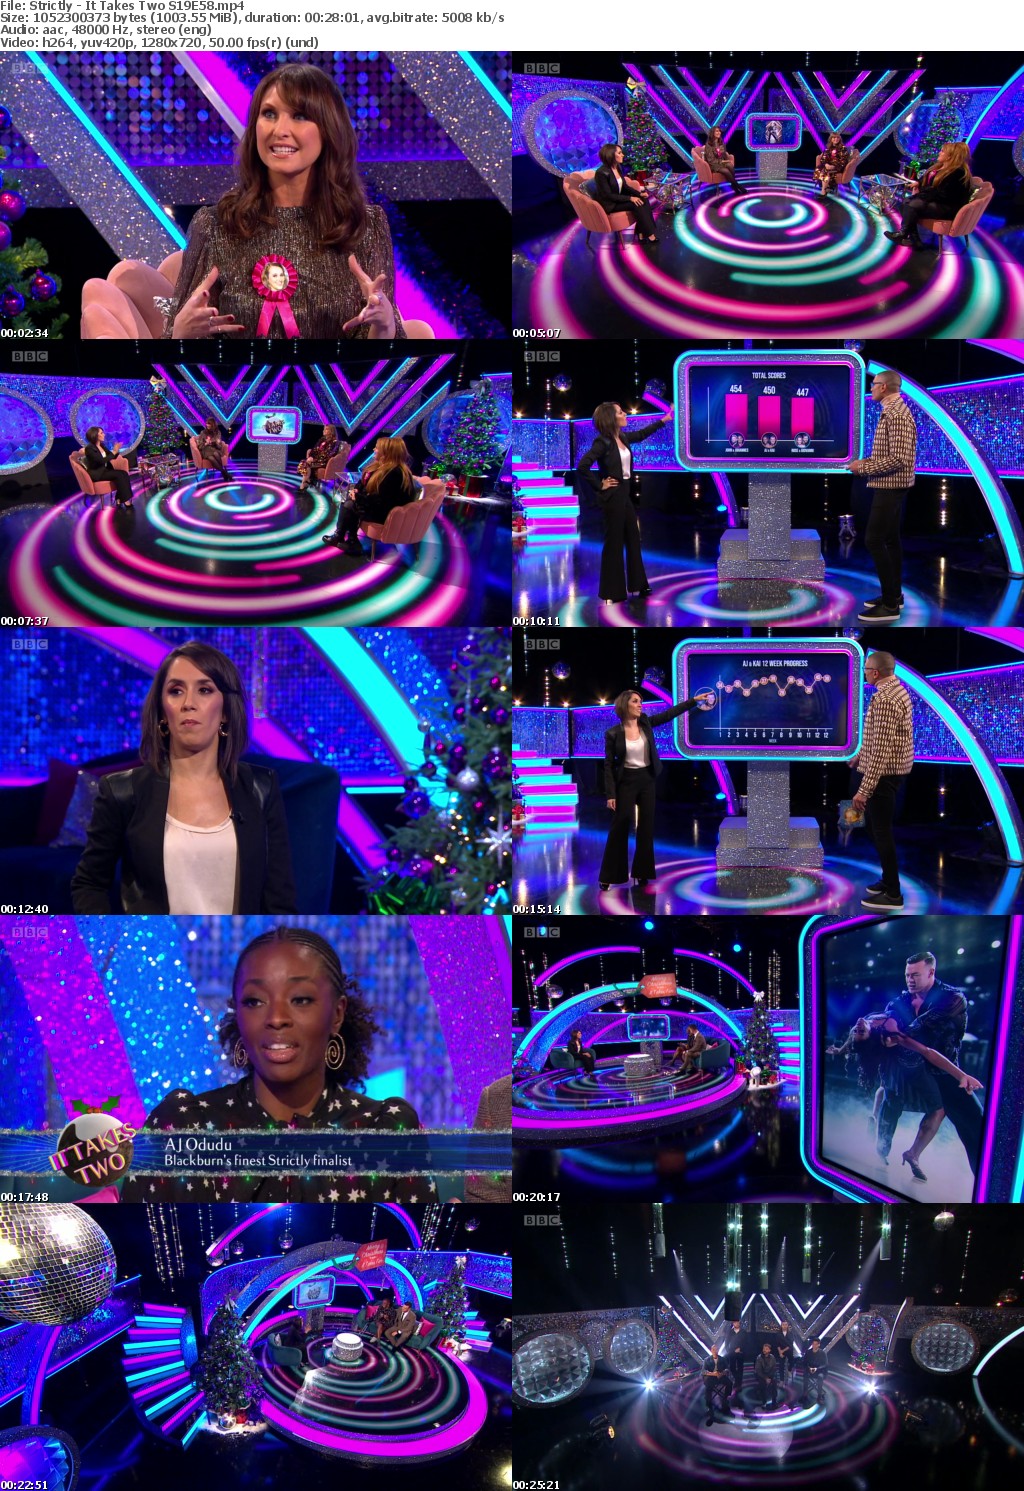 Strictly - It Takes Two S19E58 (1280x720p HD, 50fps, soft Eng subs)